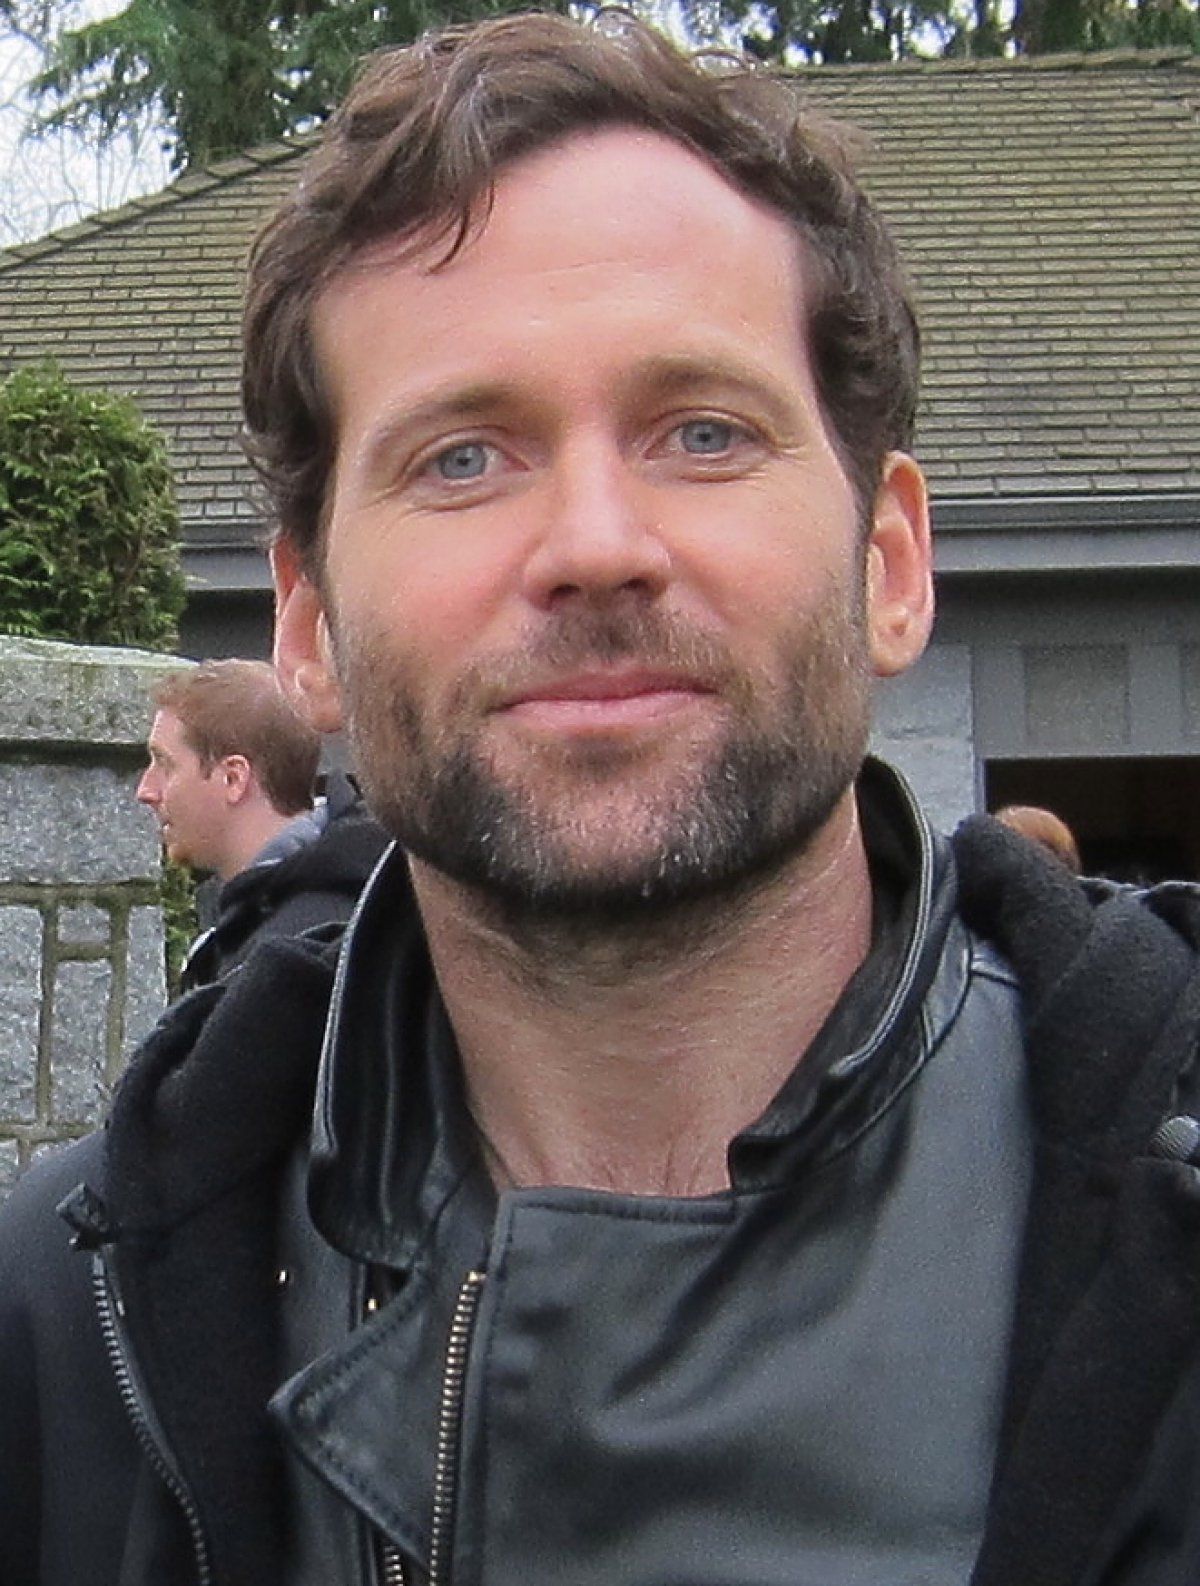 Eion Bailey to reprise Pinnochio on 'Once Upon a Time'